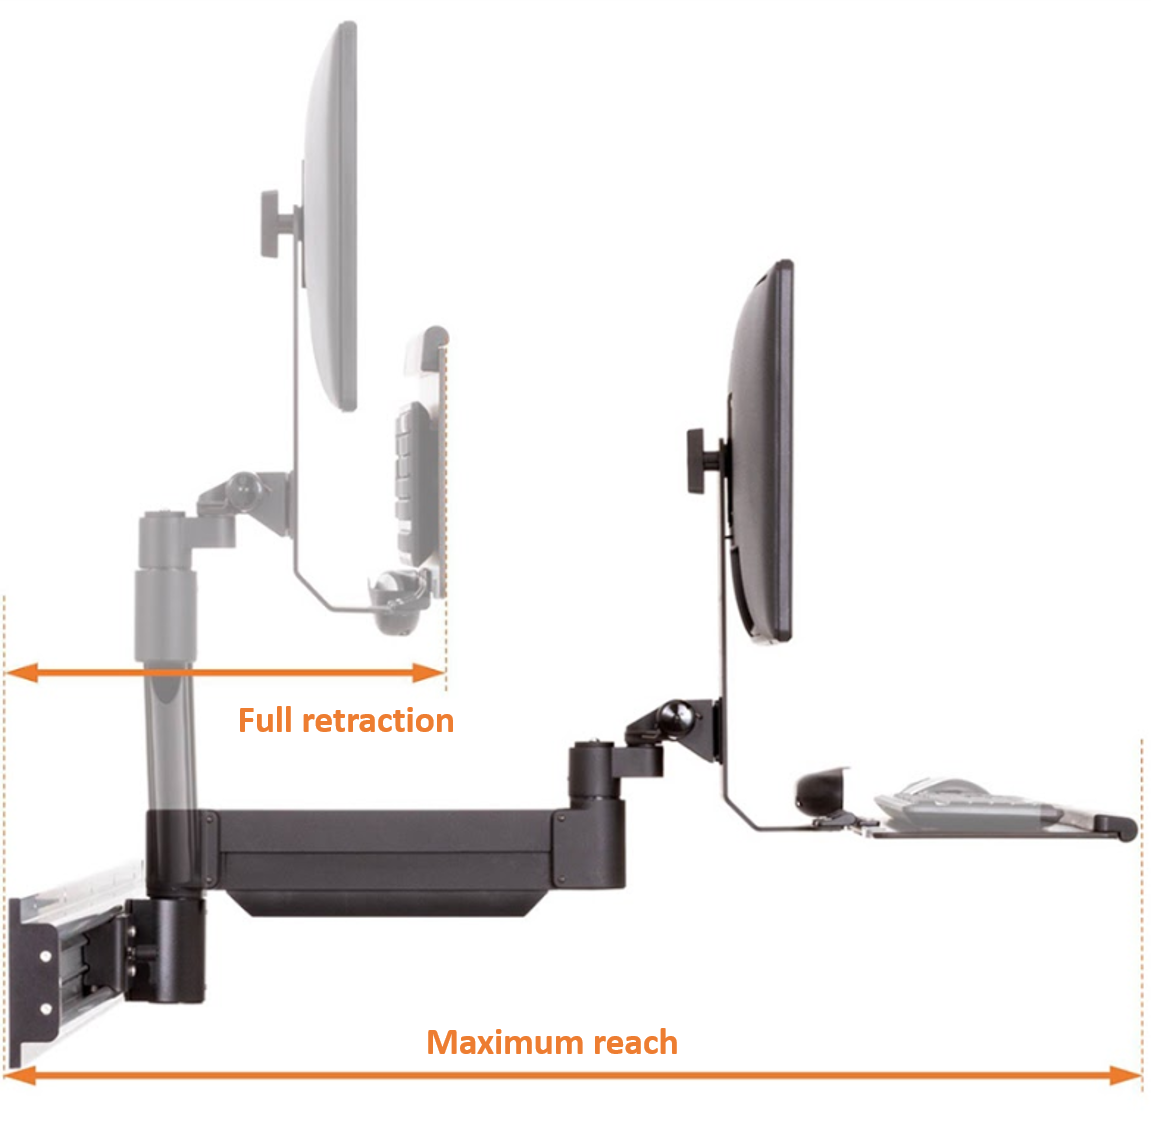 SERIES-118 workstation keyboard and monitor mount horizontal reach and retraction from a side view